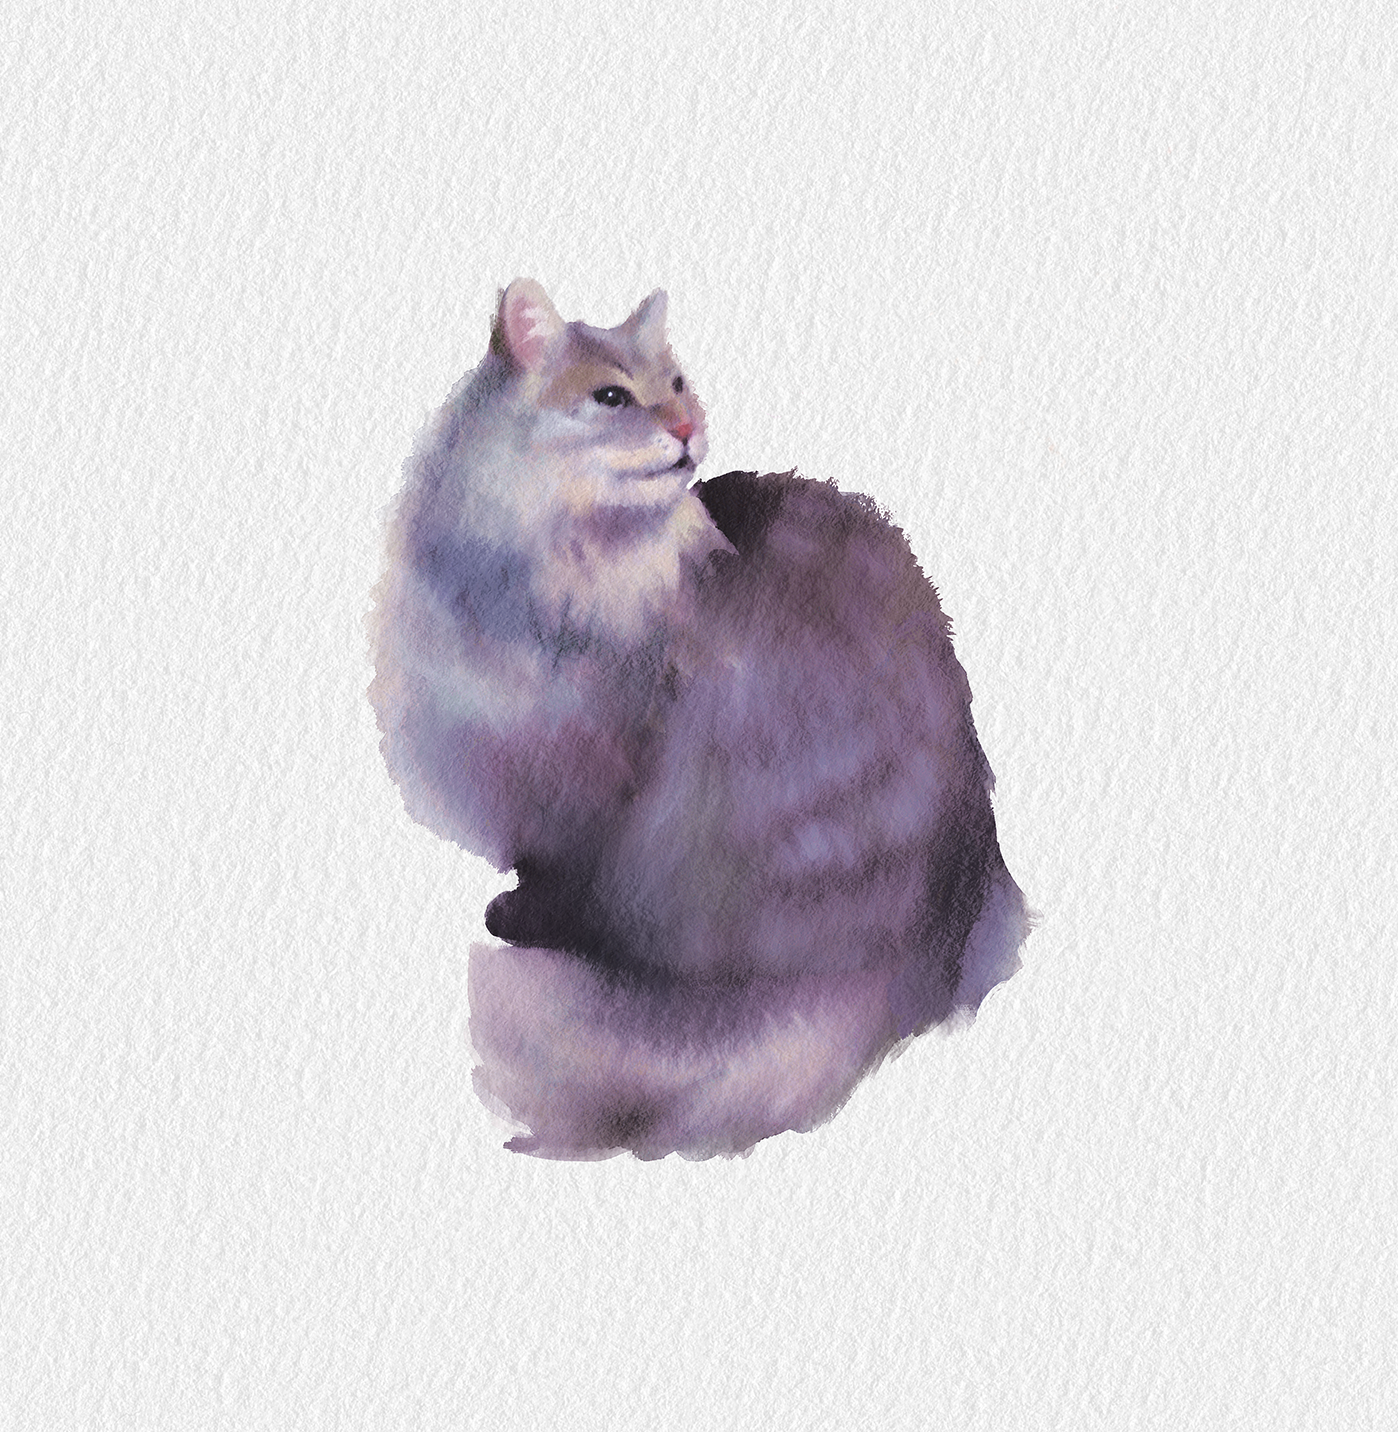 Watercolor of a gentle looking cat, looking at its side and waiting for something (probably food or scritches)